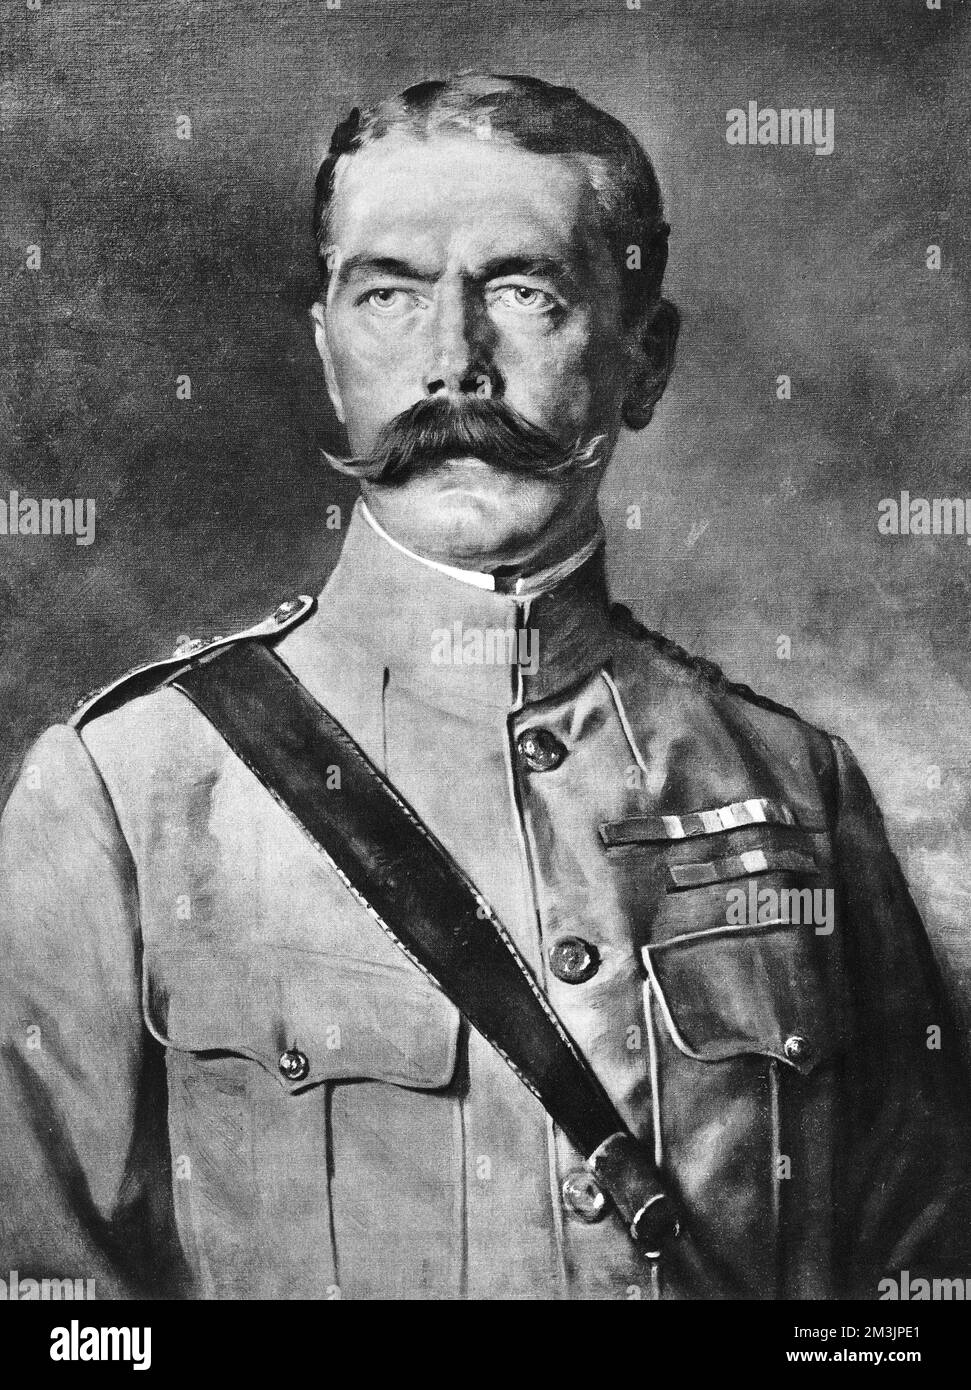 Lord Horatio Kitchener (1850 - 1916), appointed Secretary of War by Herbert Asquith on the outbreak of World War I.     Date: 1914 Stock Photo